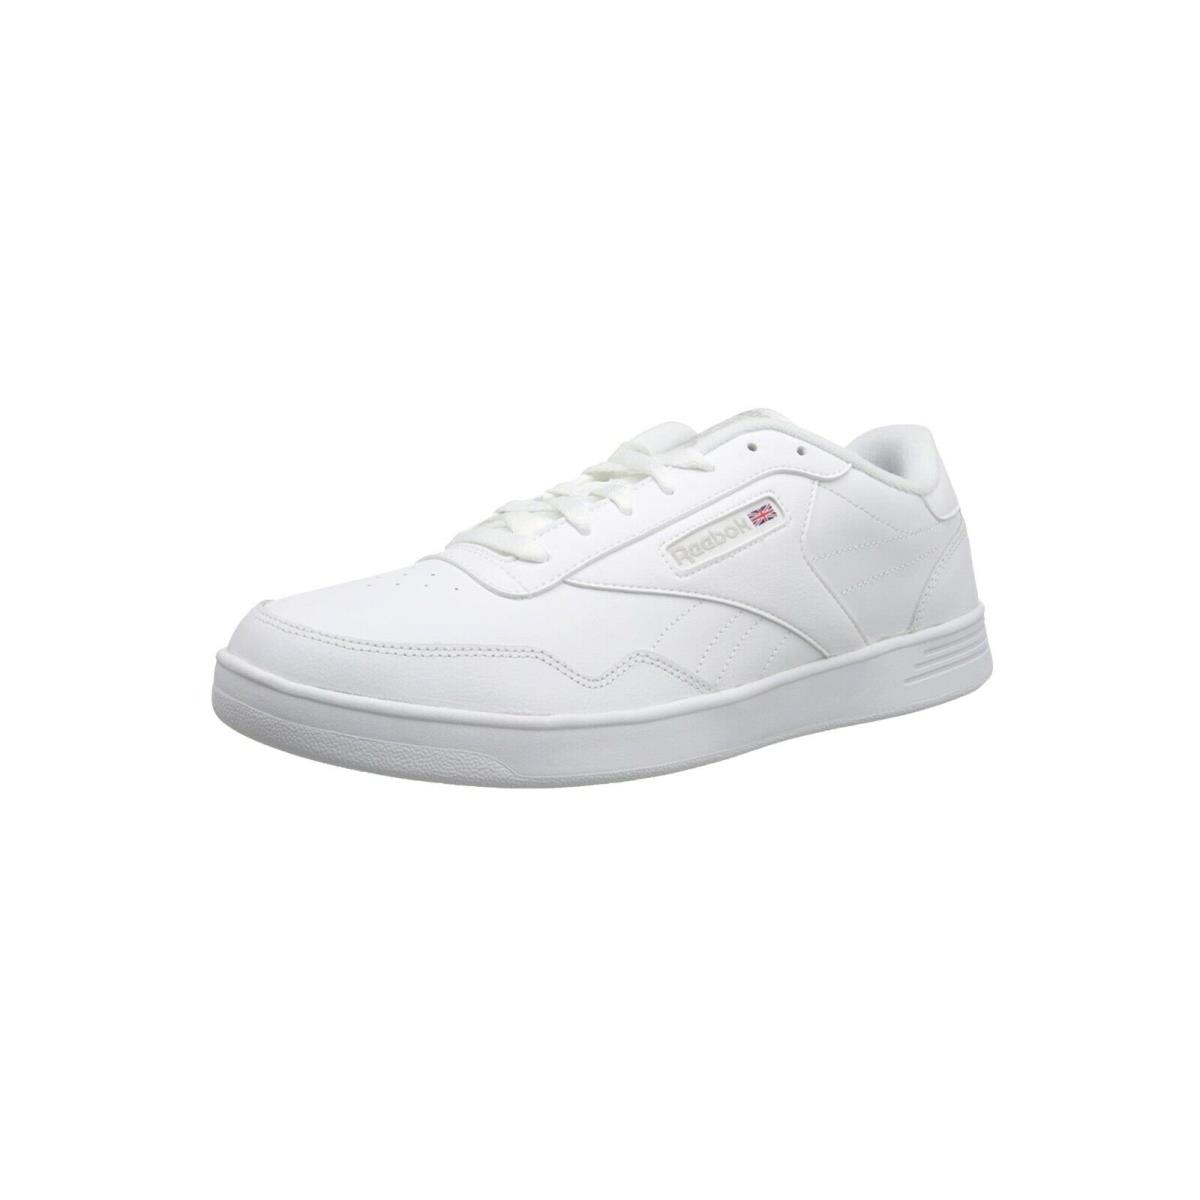 Reebok Men`s Club Memt 4E Extra Wide Classic Shoes Sneakers V68165 - White/steel